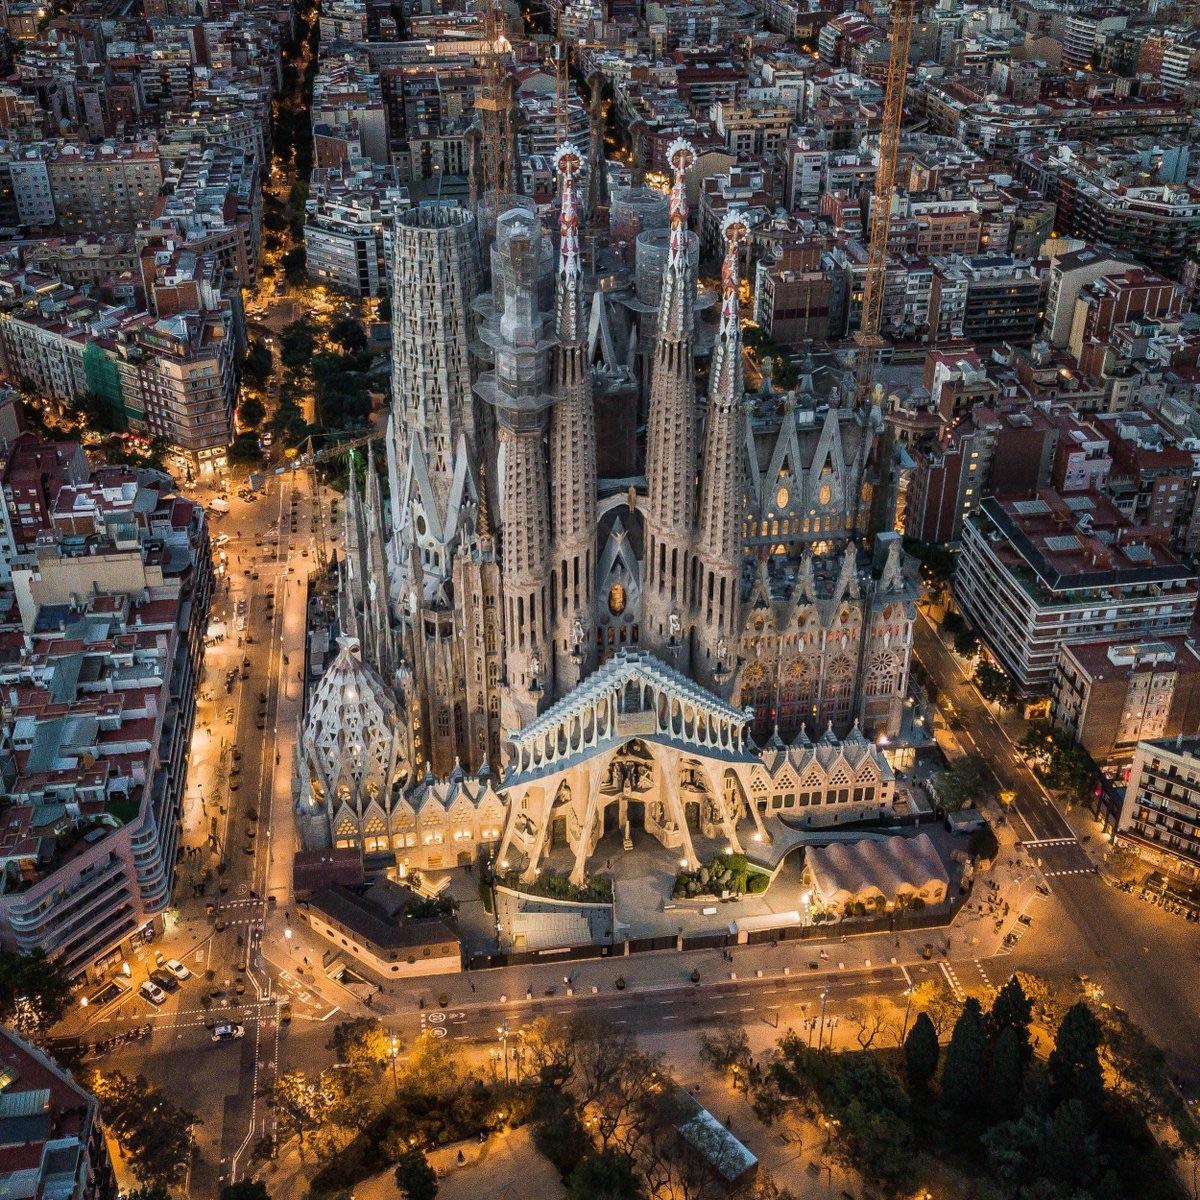 Maybe that's the secret to great art — art made only for the eye of God. That was the spirit that built the Gothic wonders of the Middle Ages, and lives on today through Gaudí's dreamlike vision...